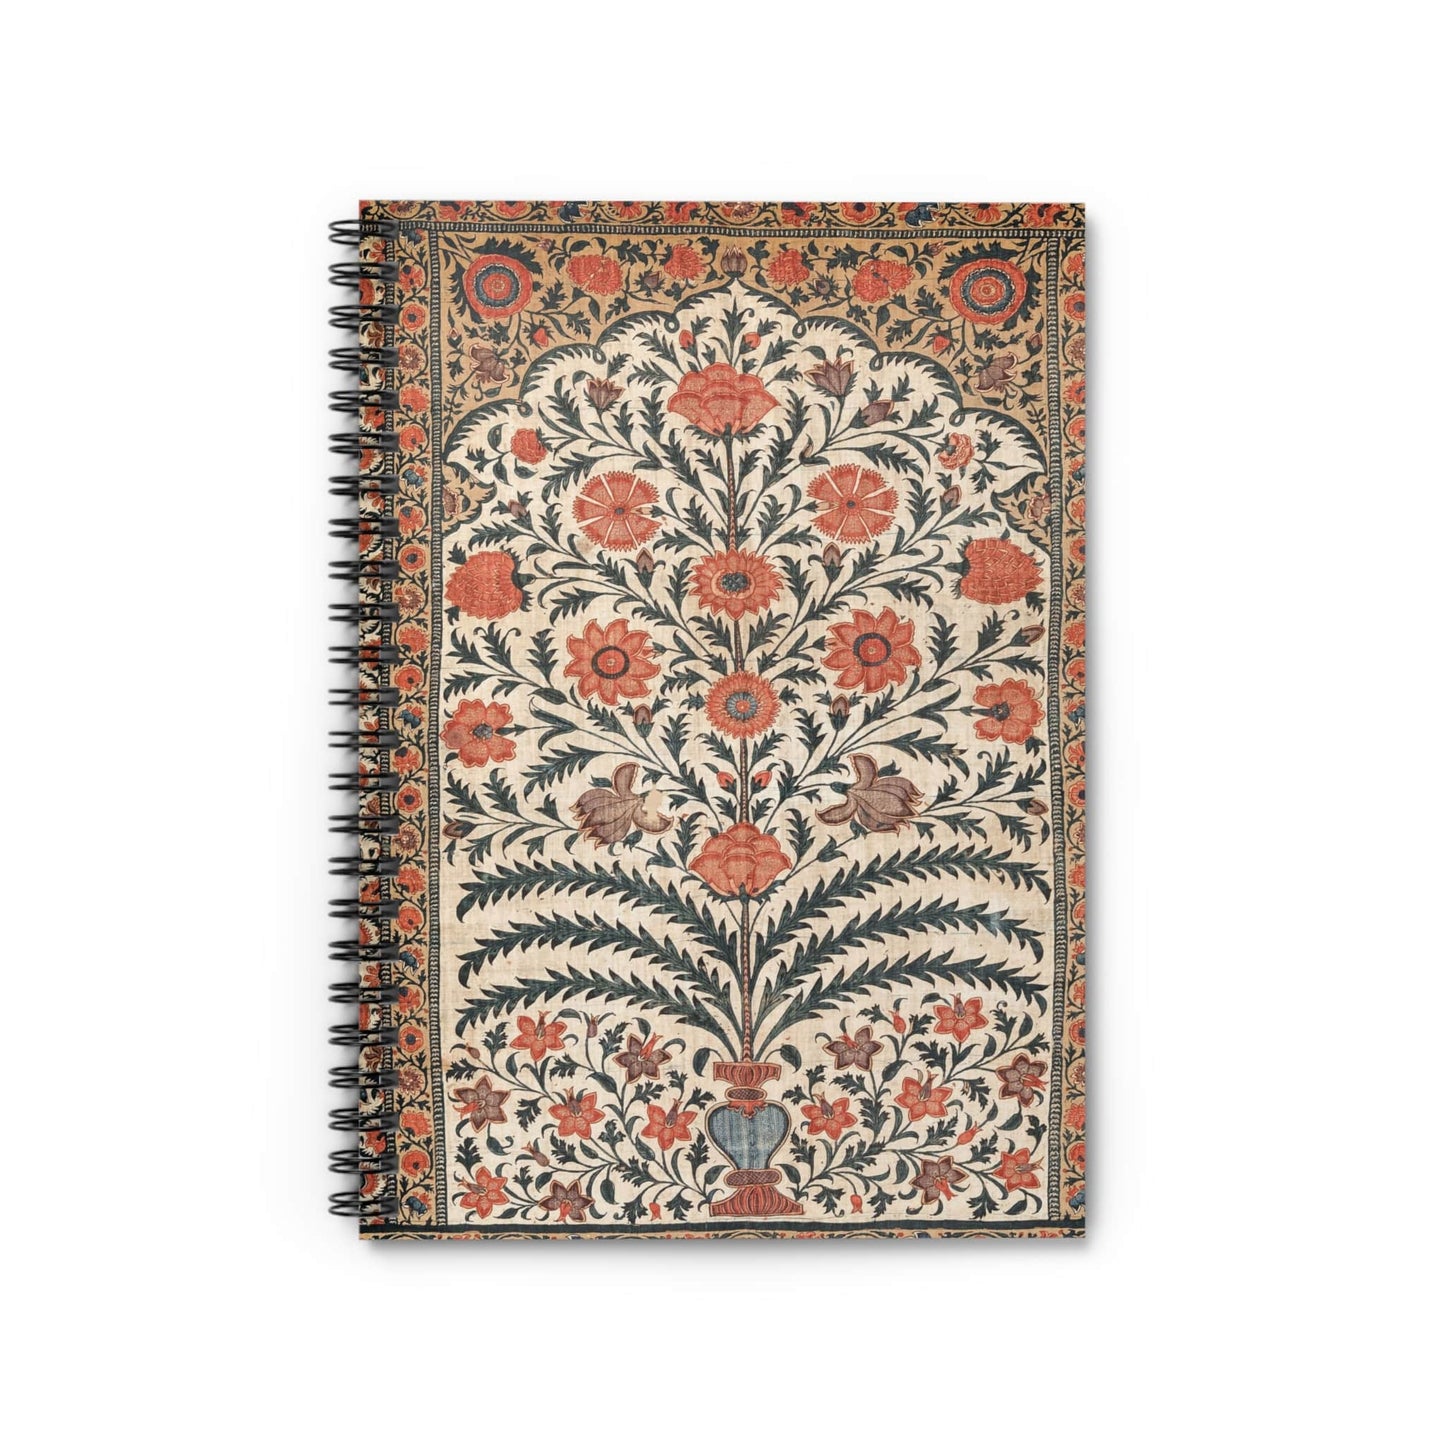 Flower Pattern Notebook with floral plant cover, ideal for journals and planners, showcasing intricate floral plant patterns.